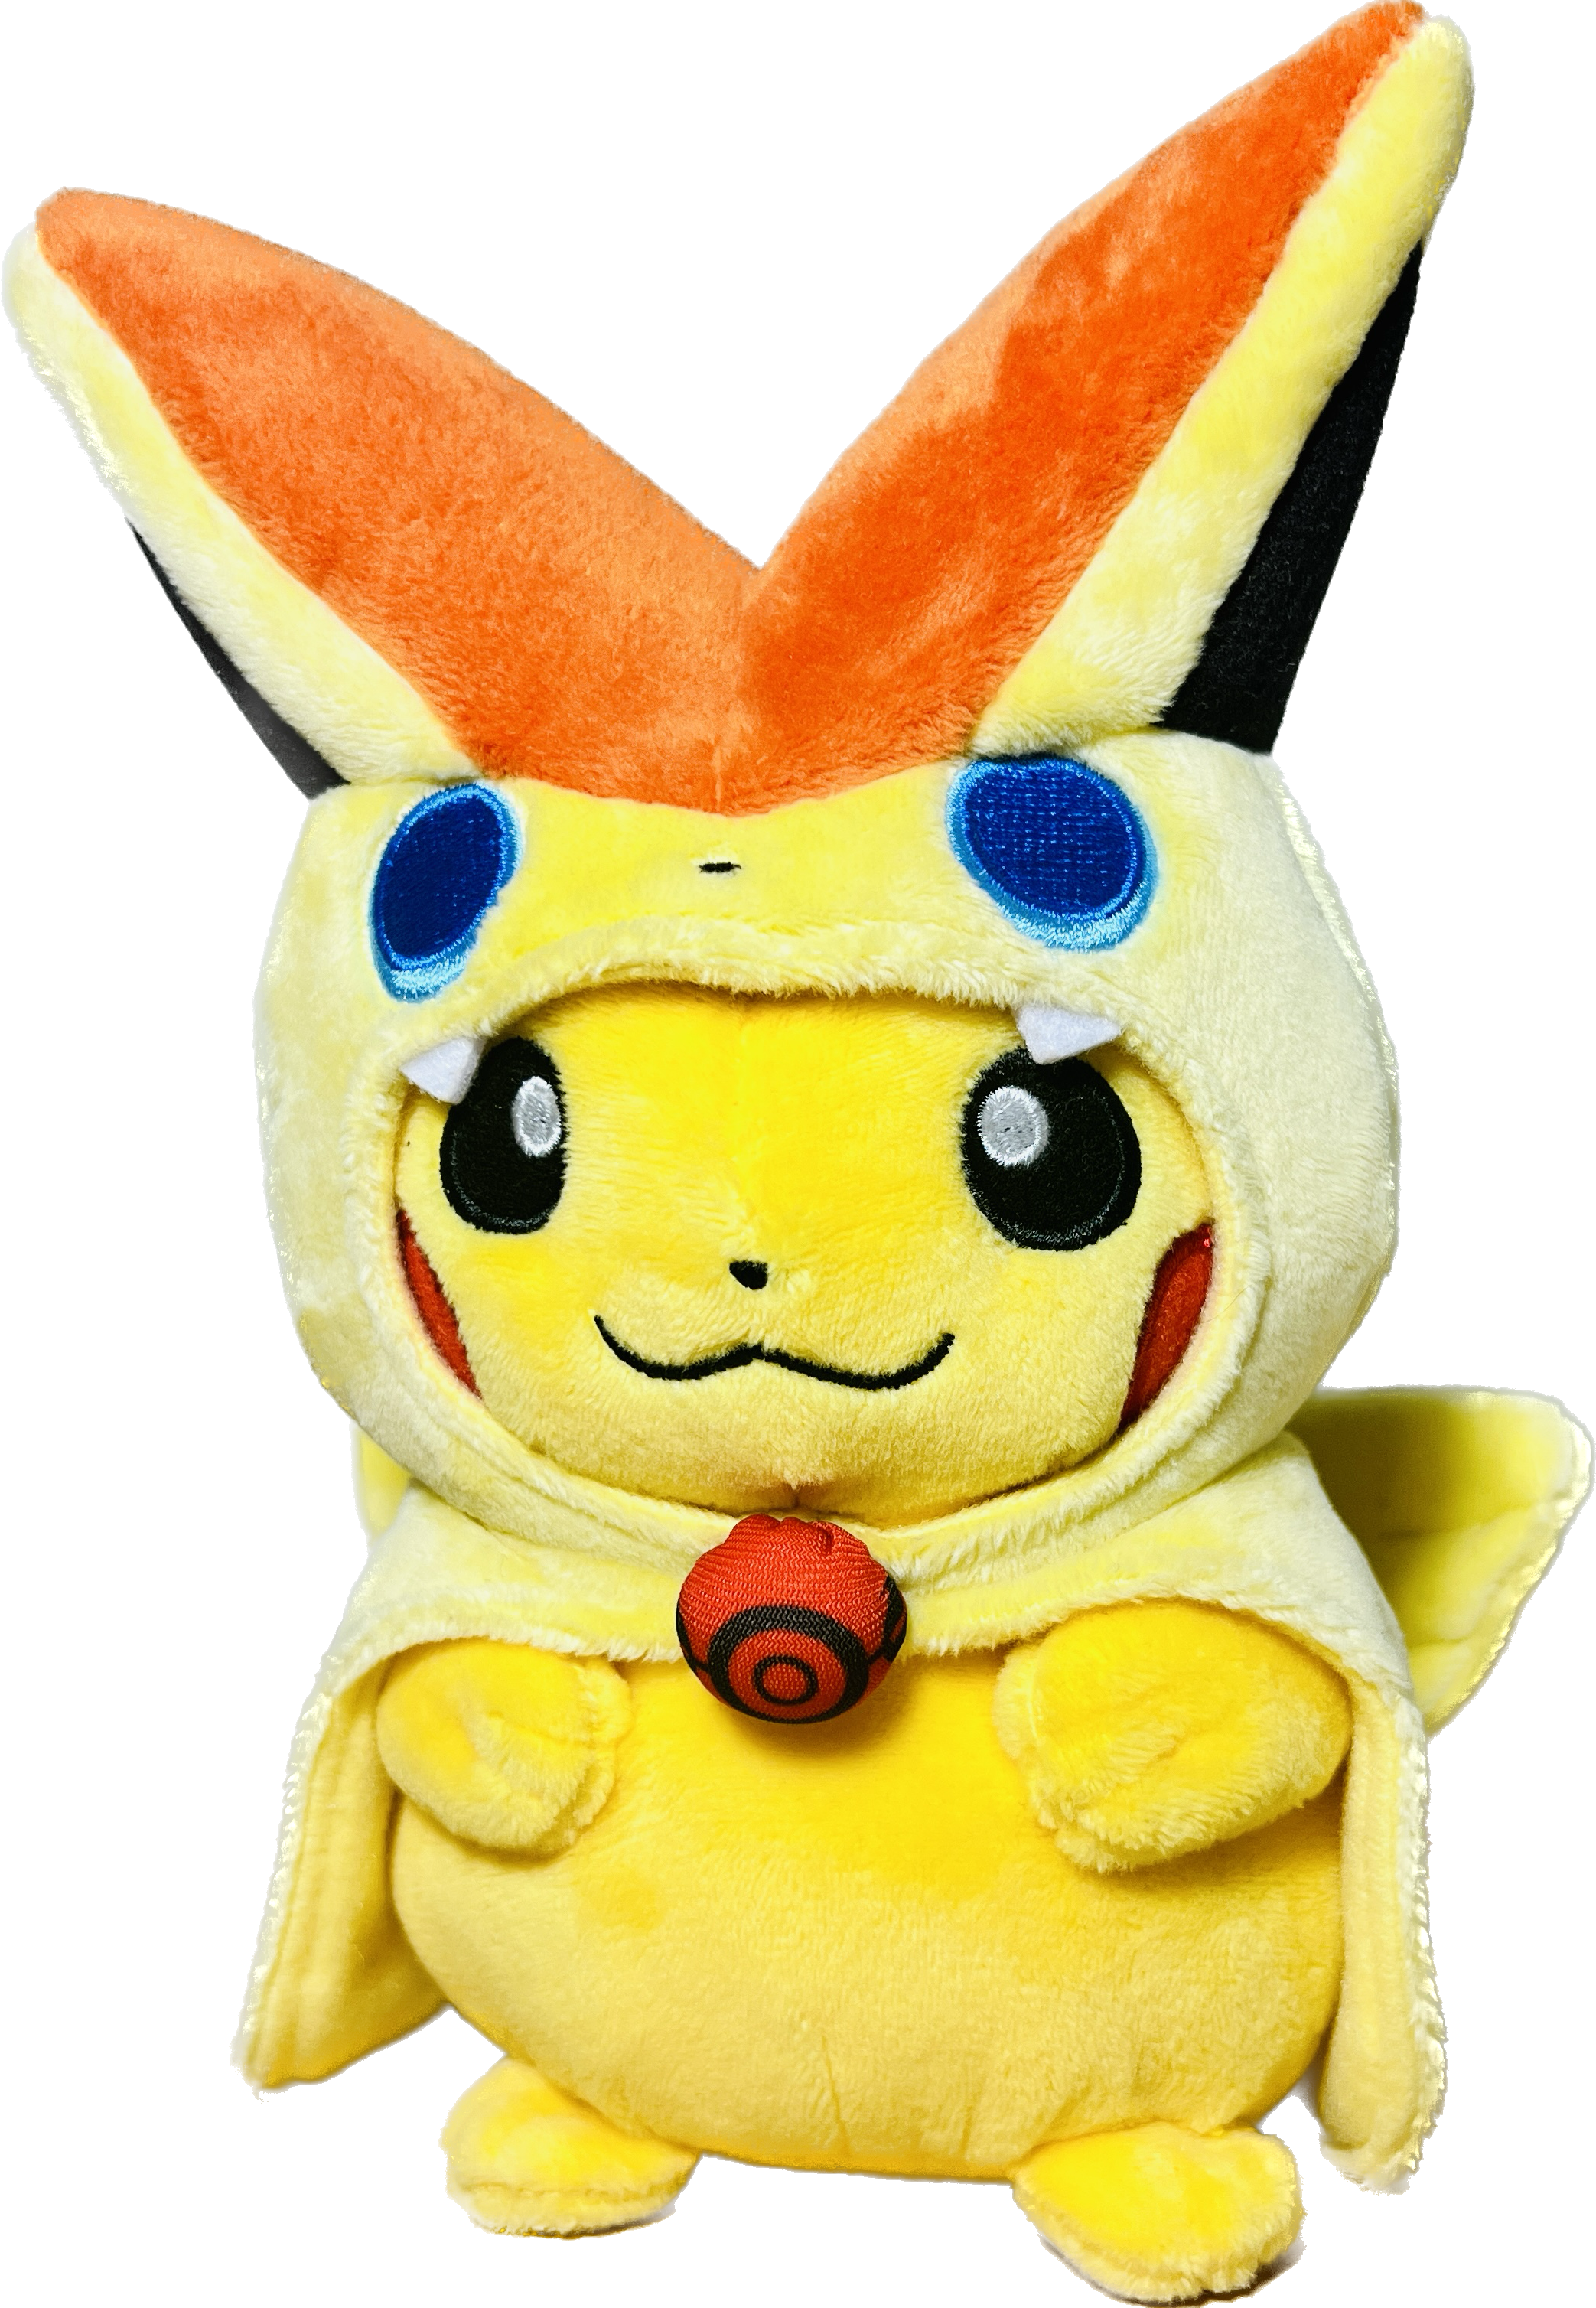 A plushie of Pikachu with a Victini hood from Pokemon!